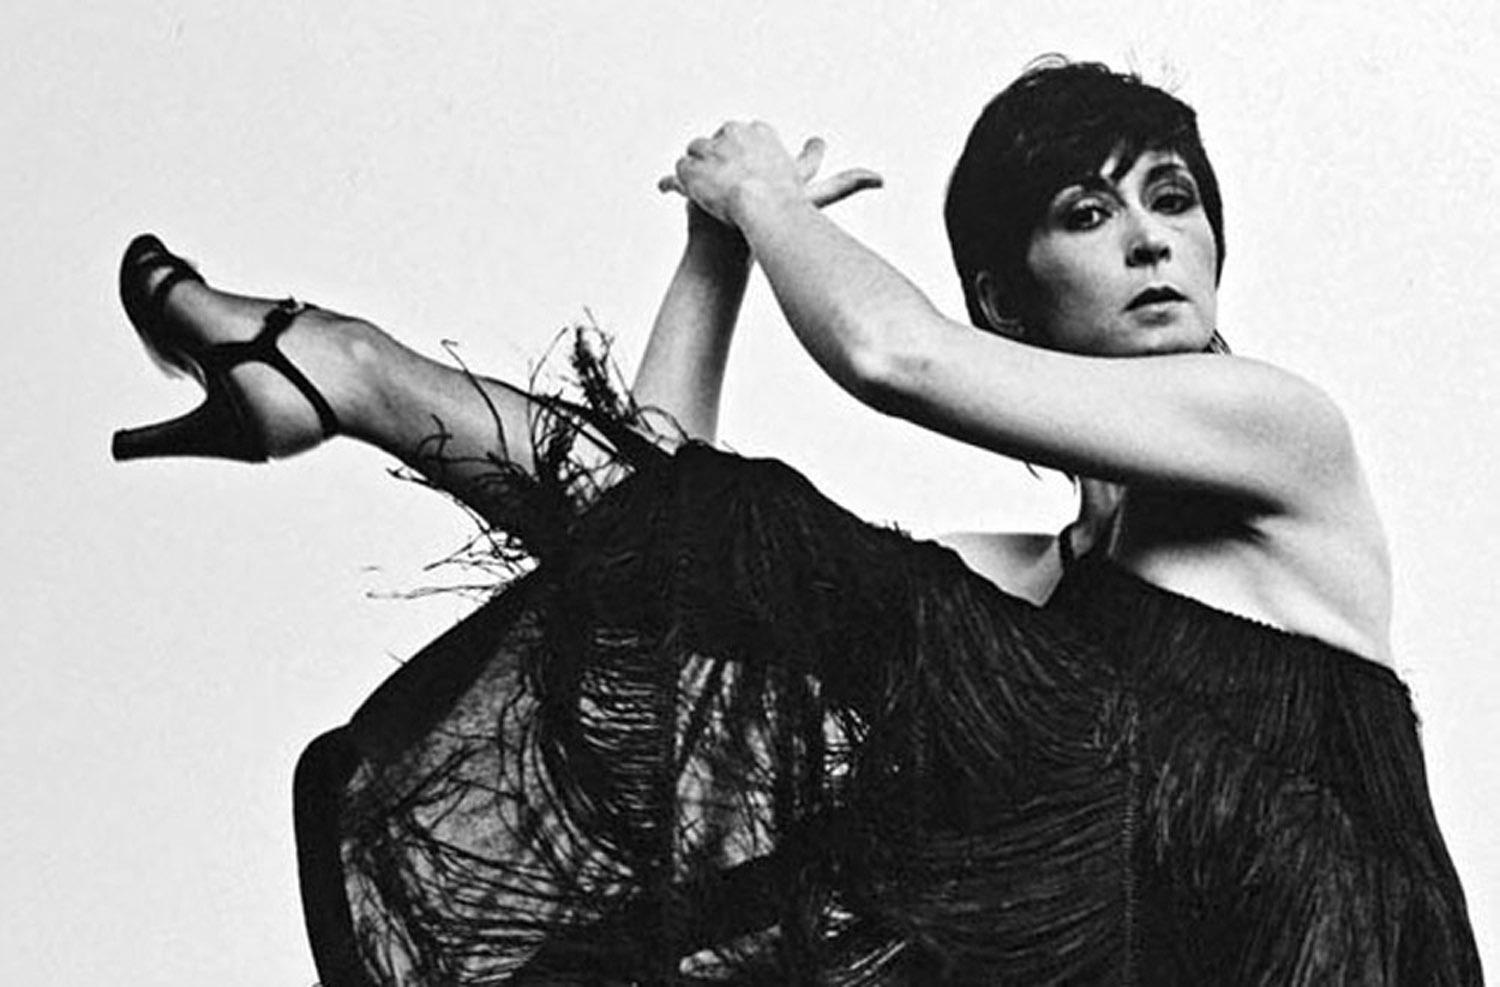  Choreographer/Dancer Twyla Tharp captured in her classic ‘Vida Blue’ pose - Photograph by Jack Mitchell